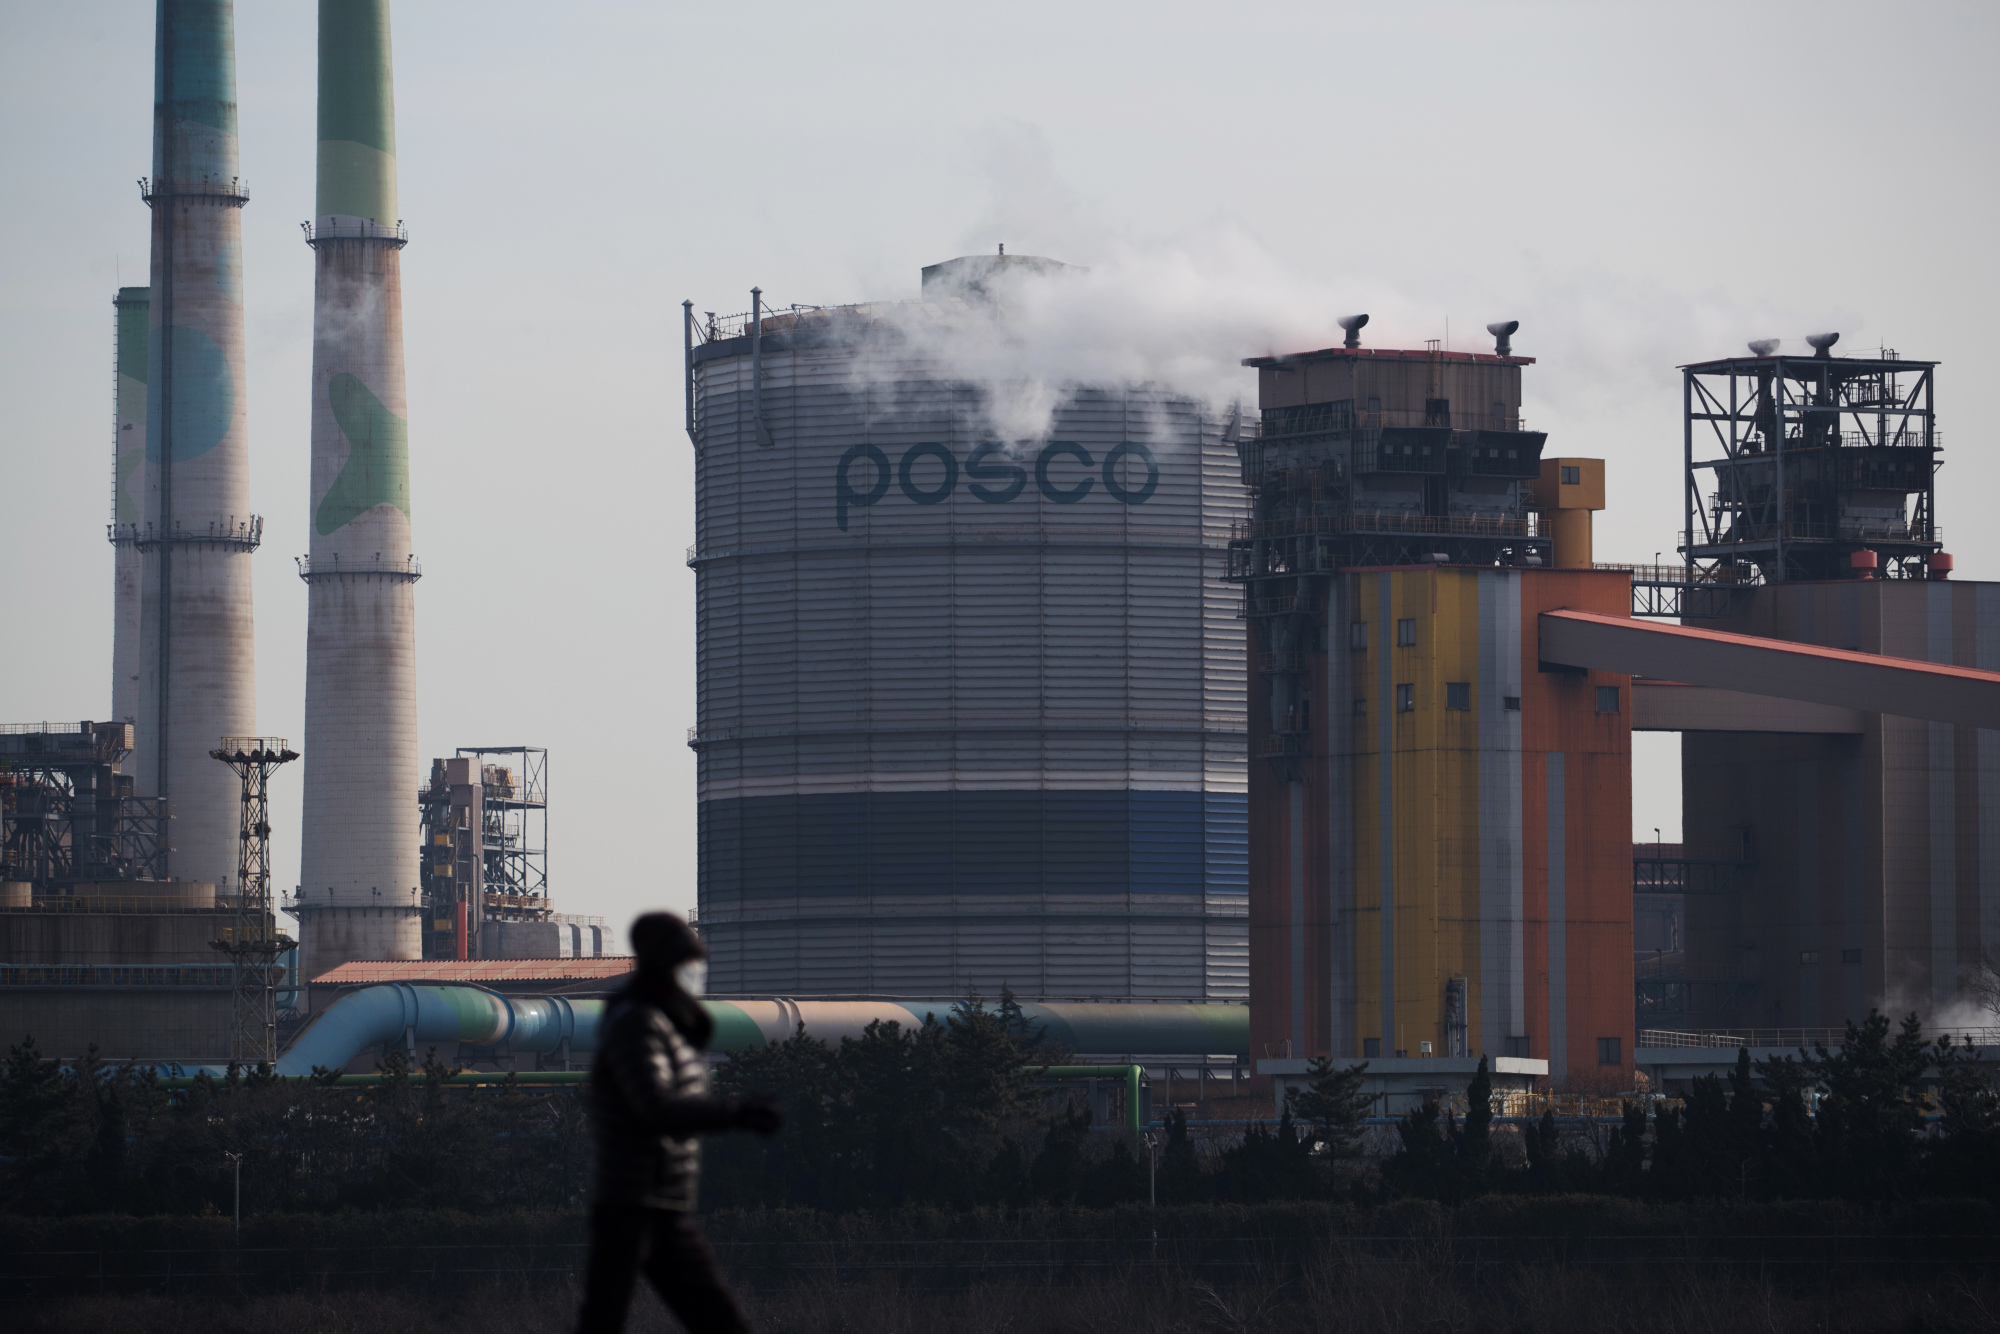 Korea's Posco to invest $136 million in Mexican plant by 2030, Mexico says